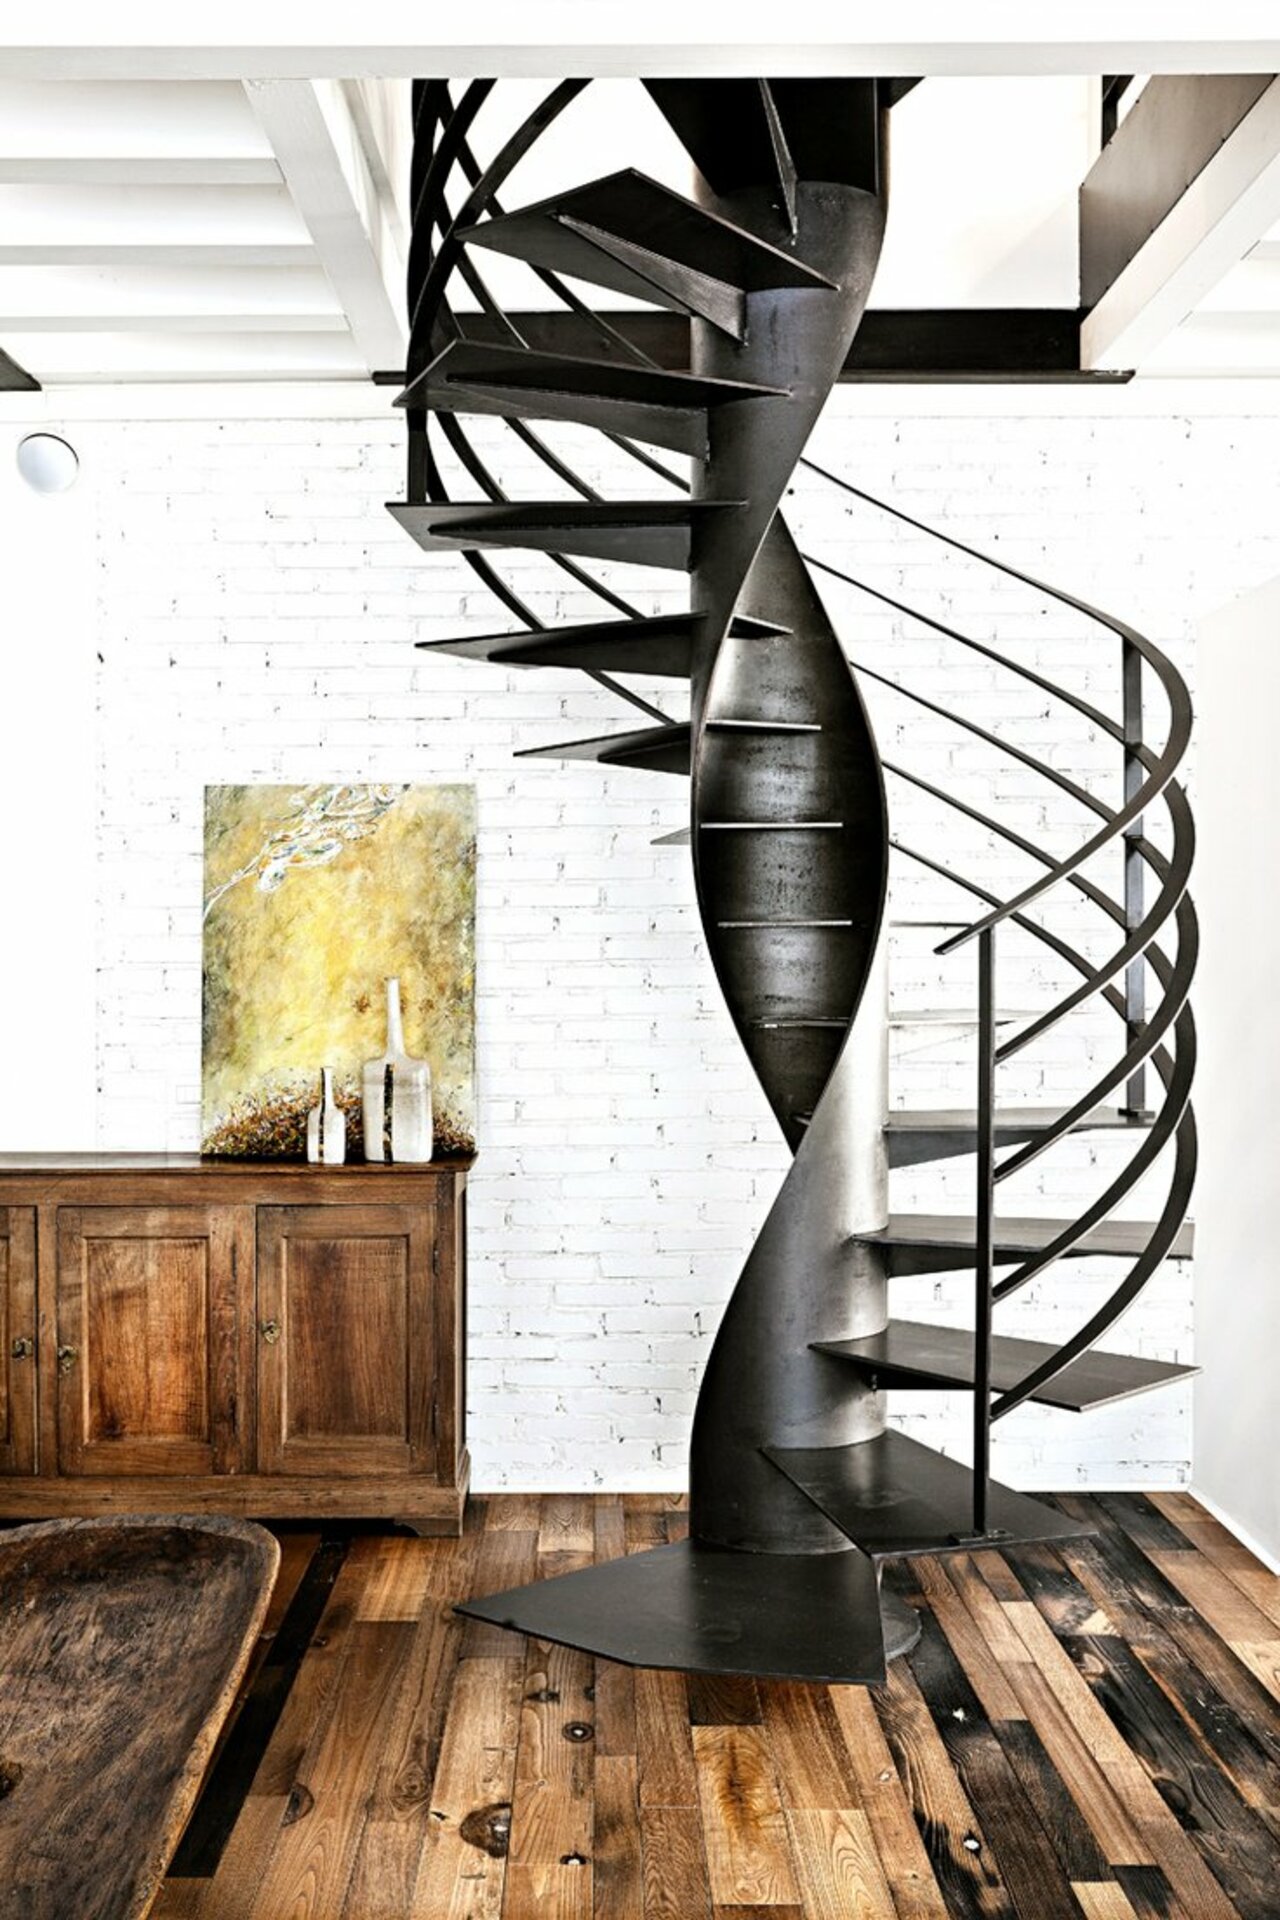 Helical burnished iron Spiral staircase ETIKA by SANDRINI SCALE #staircase #interior:… http://dlvr.it/Lnk92W https://t.co/0yBNo0TgZ4